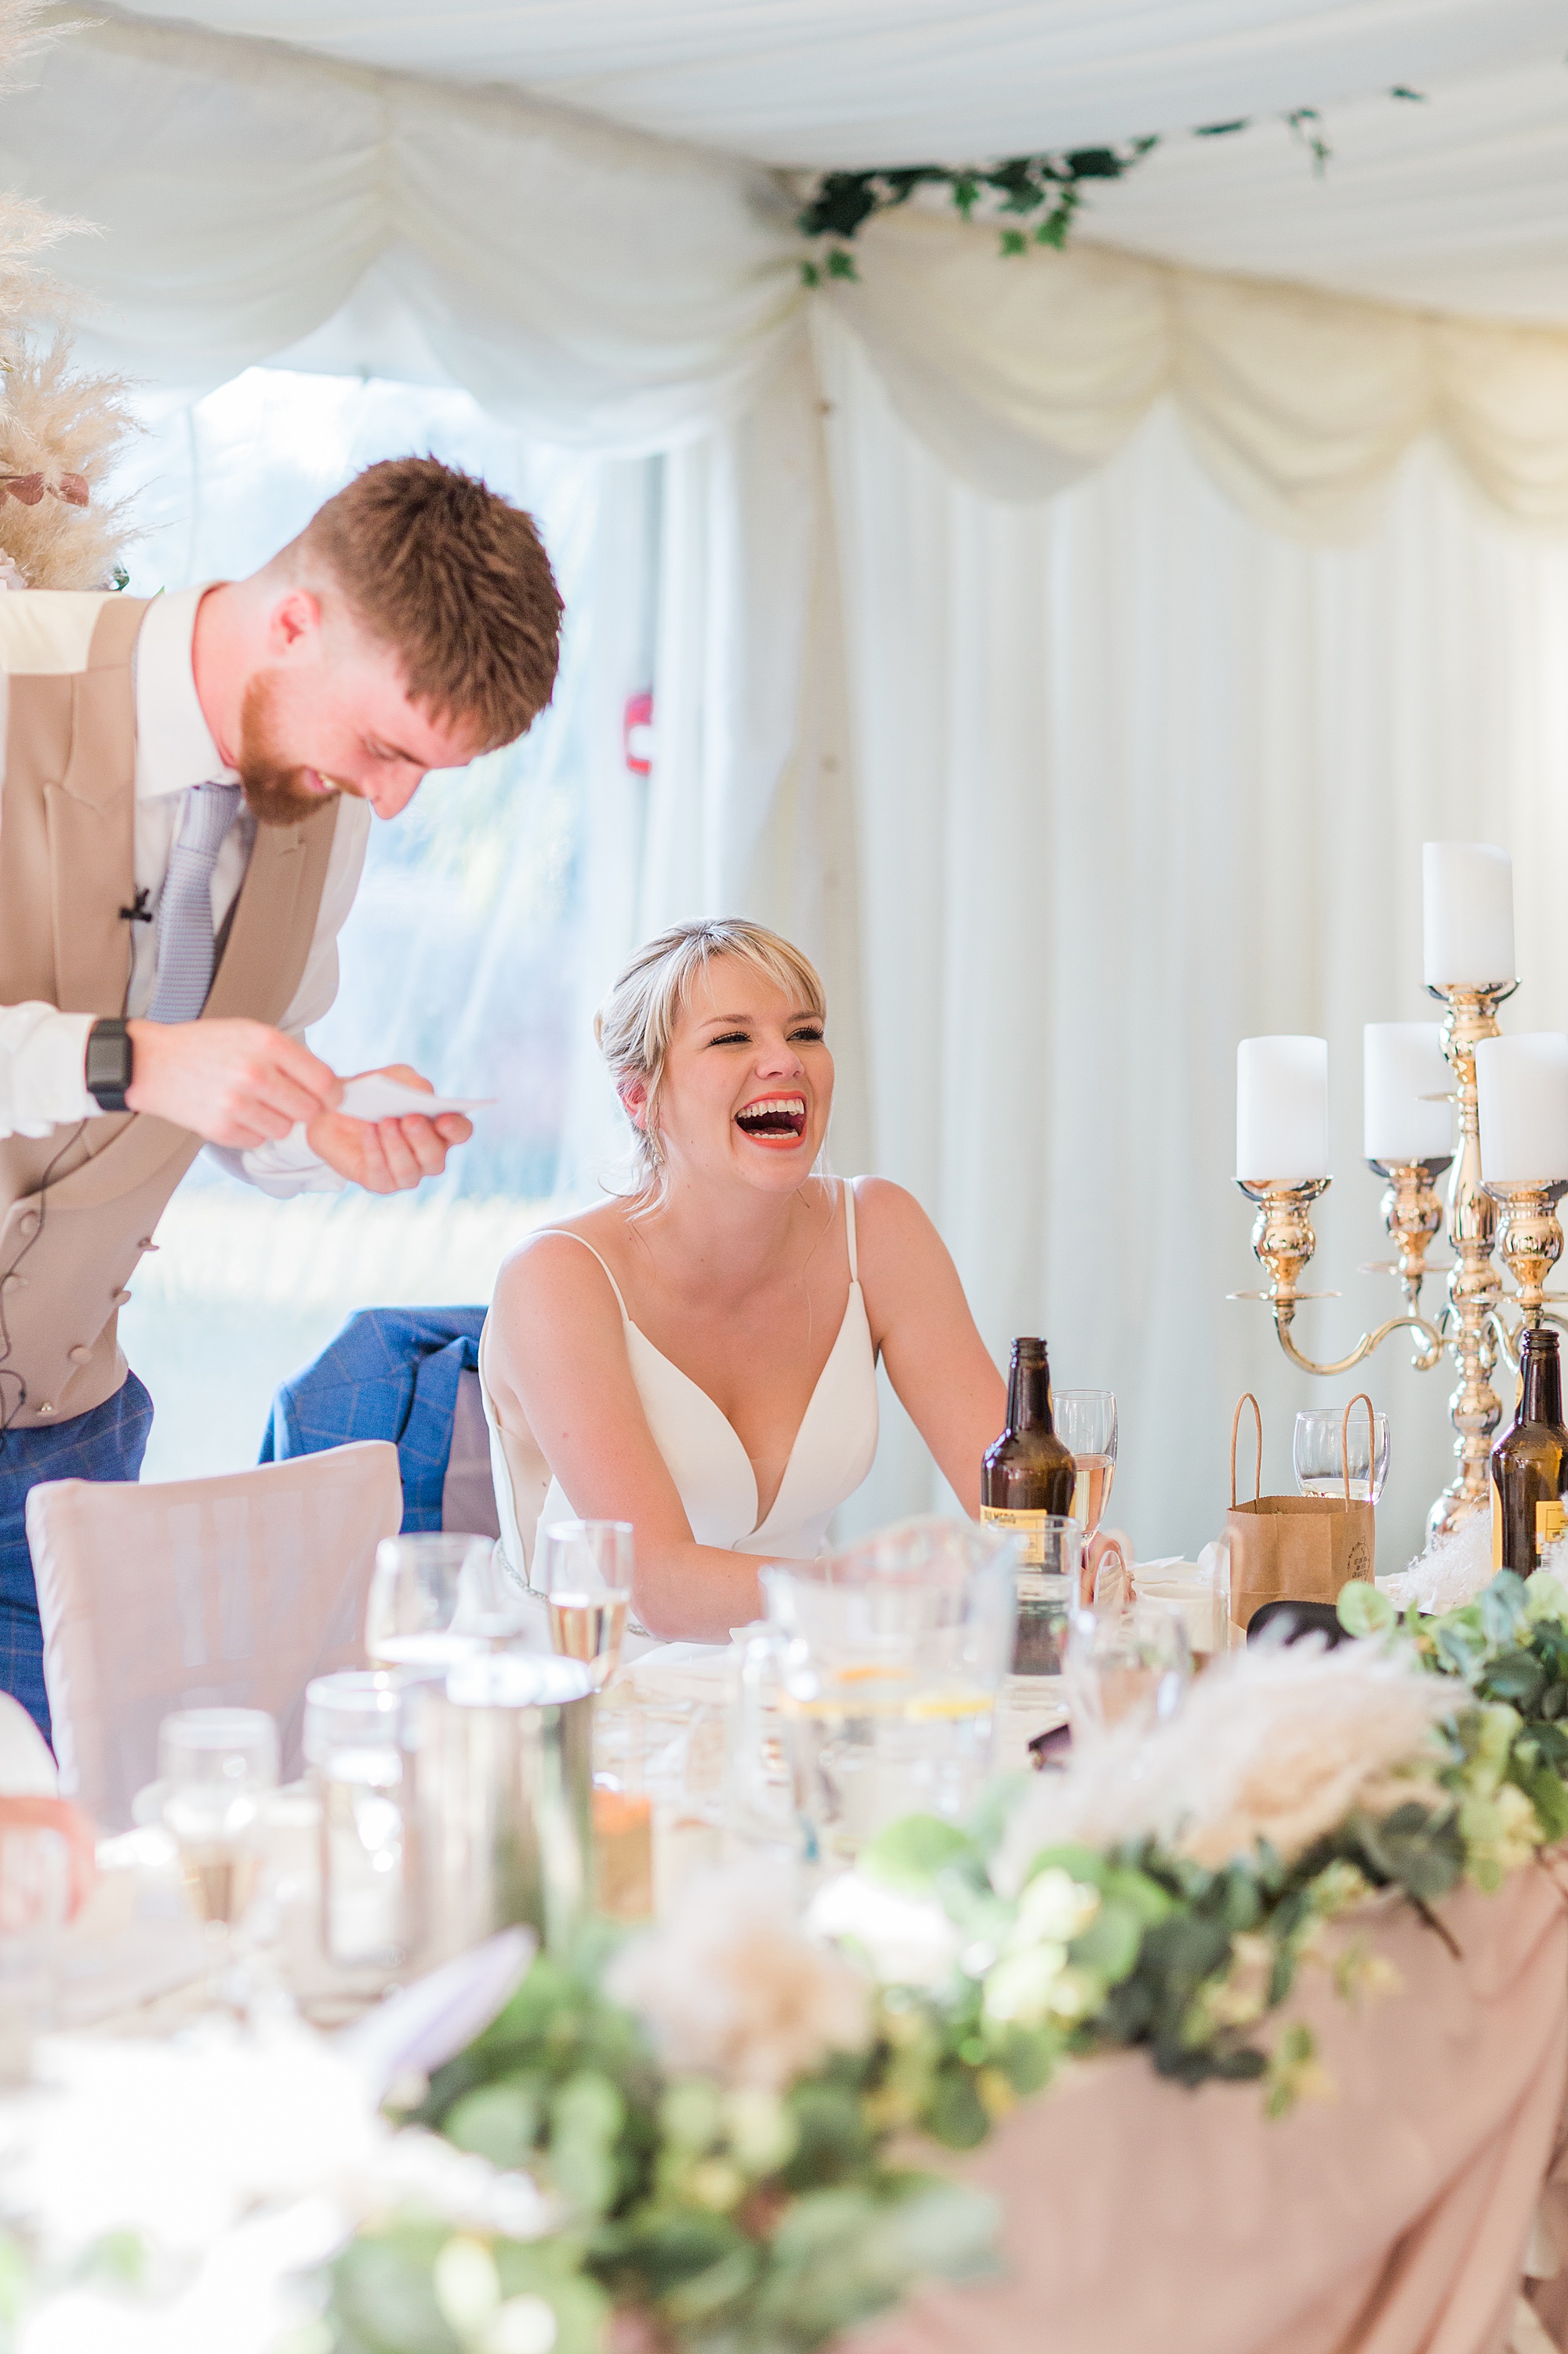 Photo shows a best man speaking at a wedding during the speeches and the bride's reaction next to him 